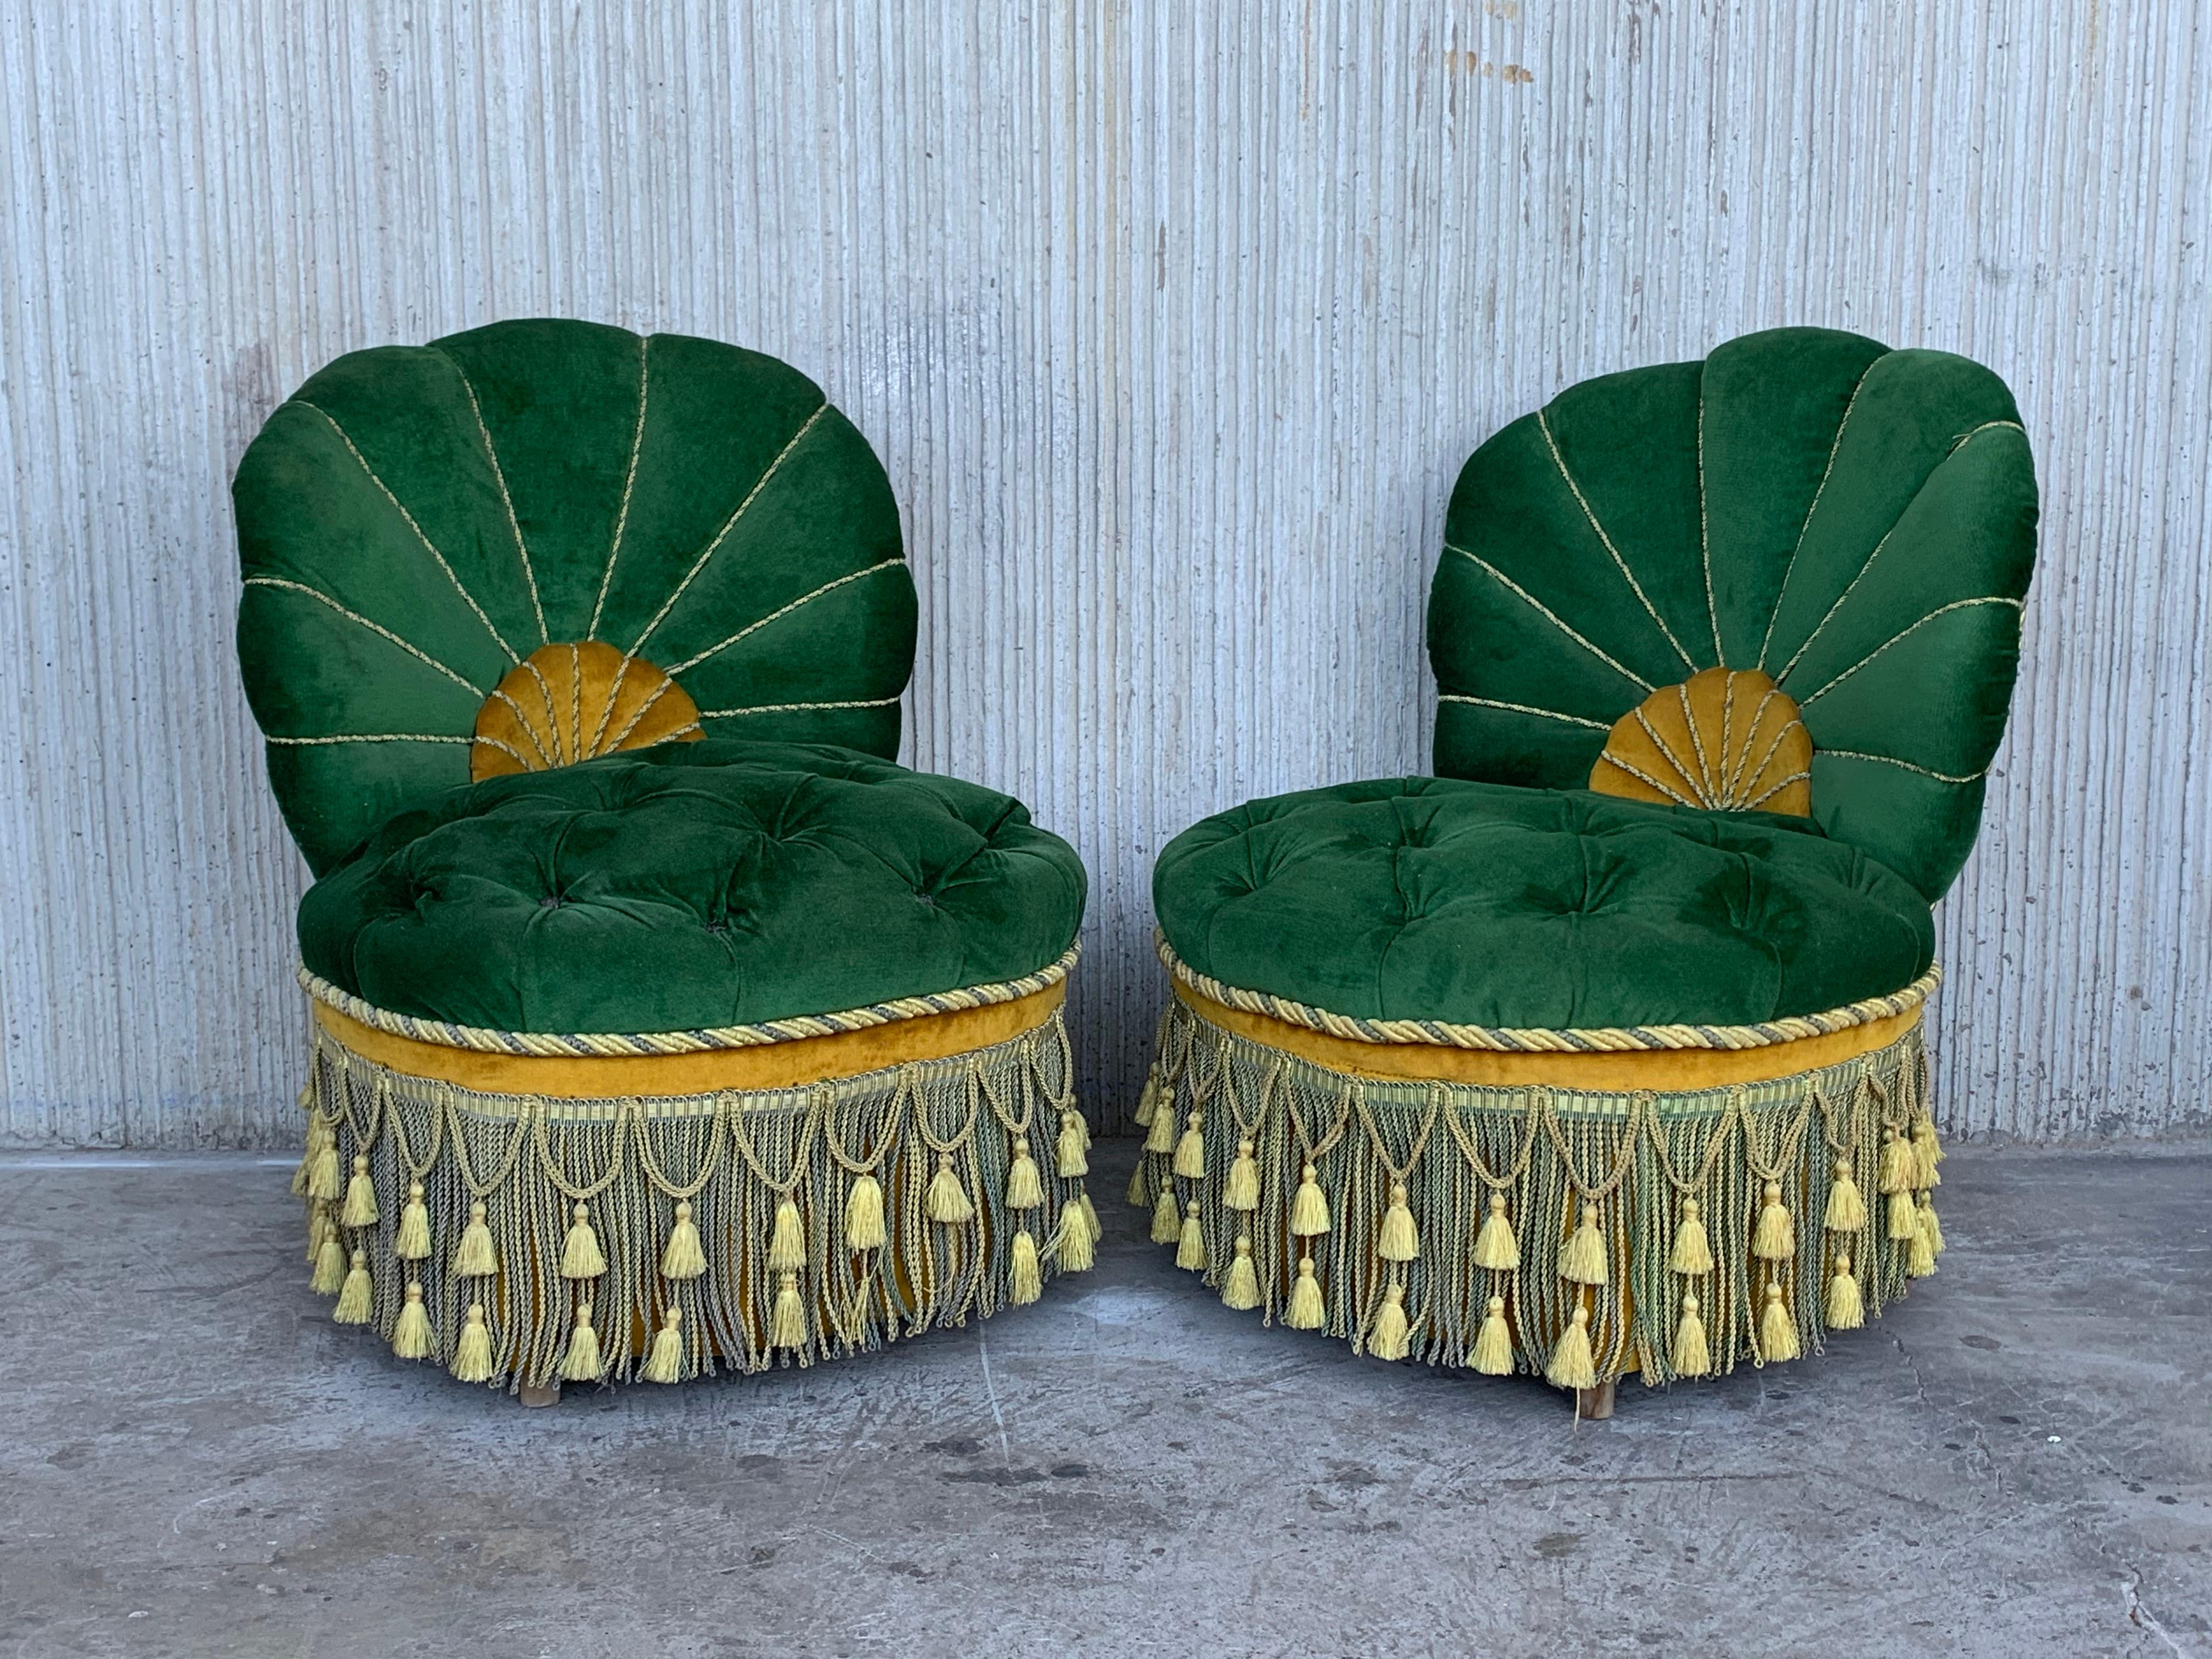 Vintage French Art Deco his and hers Chanel back parlor chairs. Classic Art Deco design channel back chairs. Original upholstered in a mauve velvet.
These chairs are very comfortable feel and look.